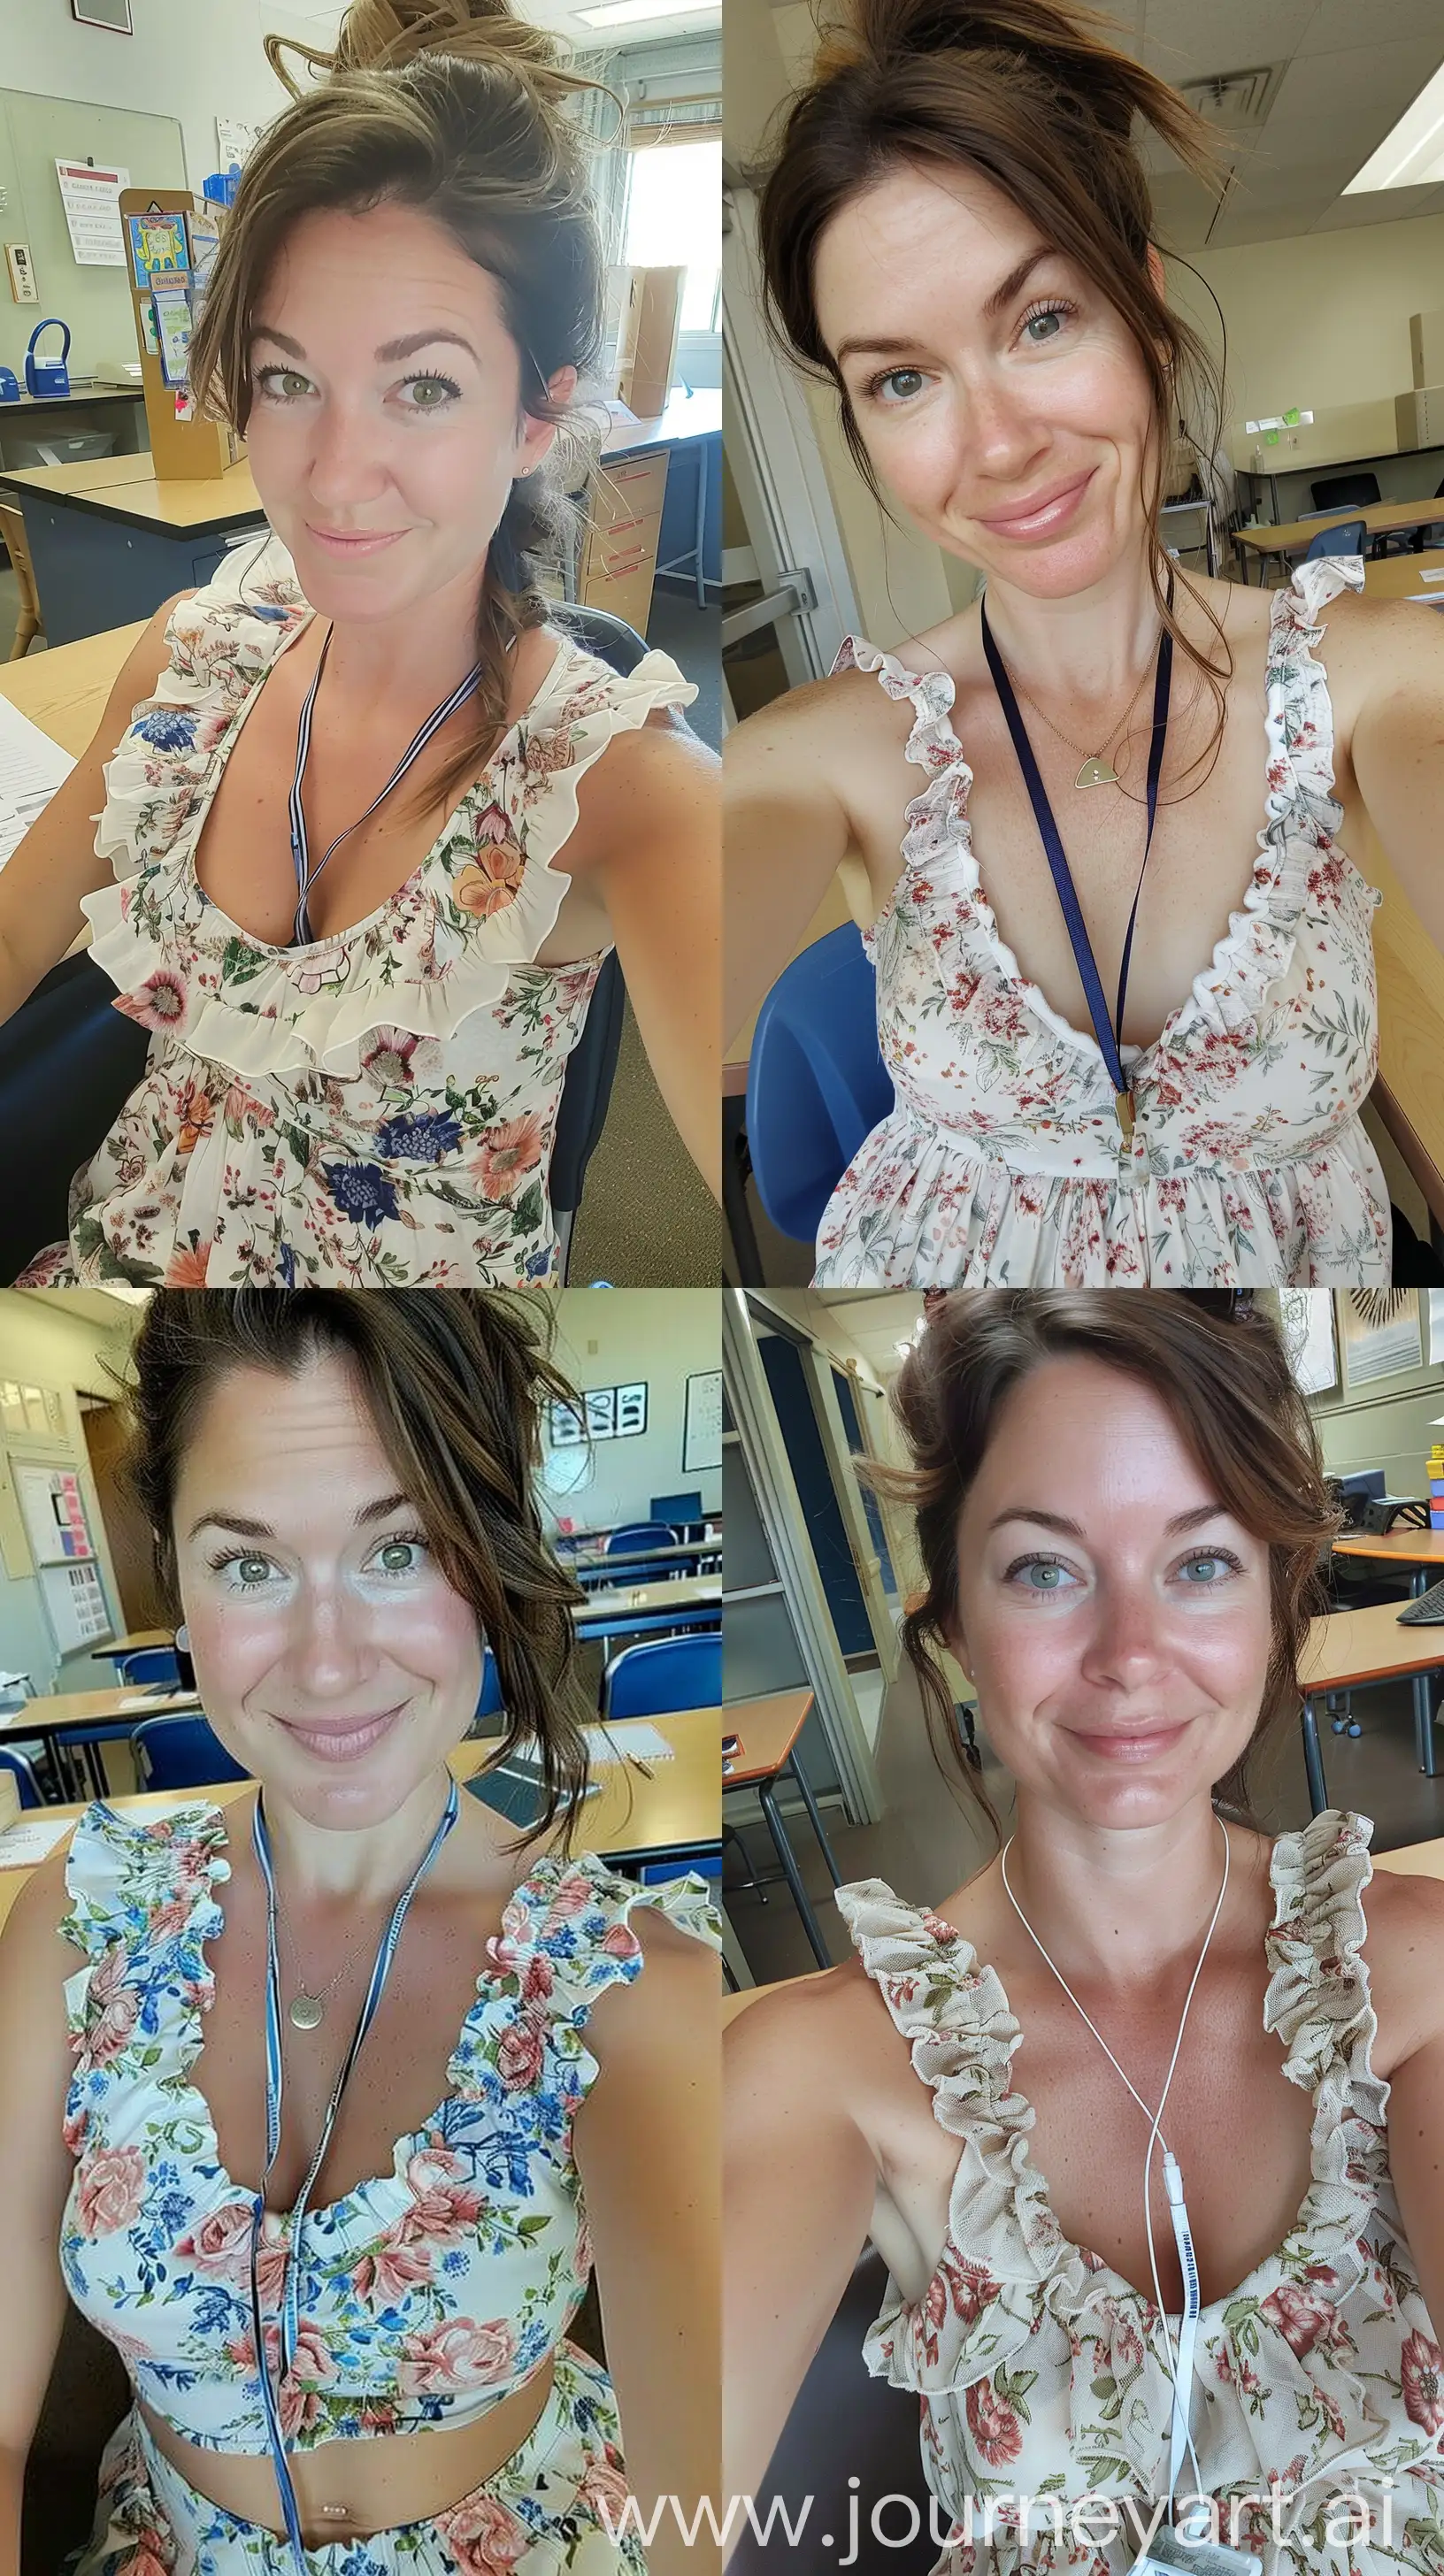 Typical elementary school teacher taking a selfie at her desk, pretty, high cheekbones, nice jawline, floral tank top with frills, lanyard around neck, close up selfie, wide set, profile throw face away in room, nice chest --ar 9:16